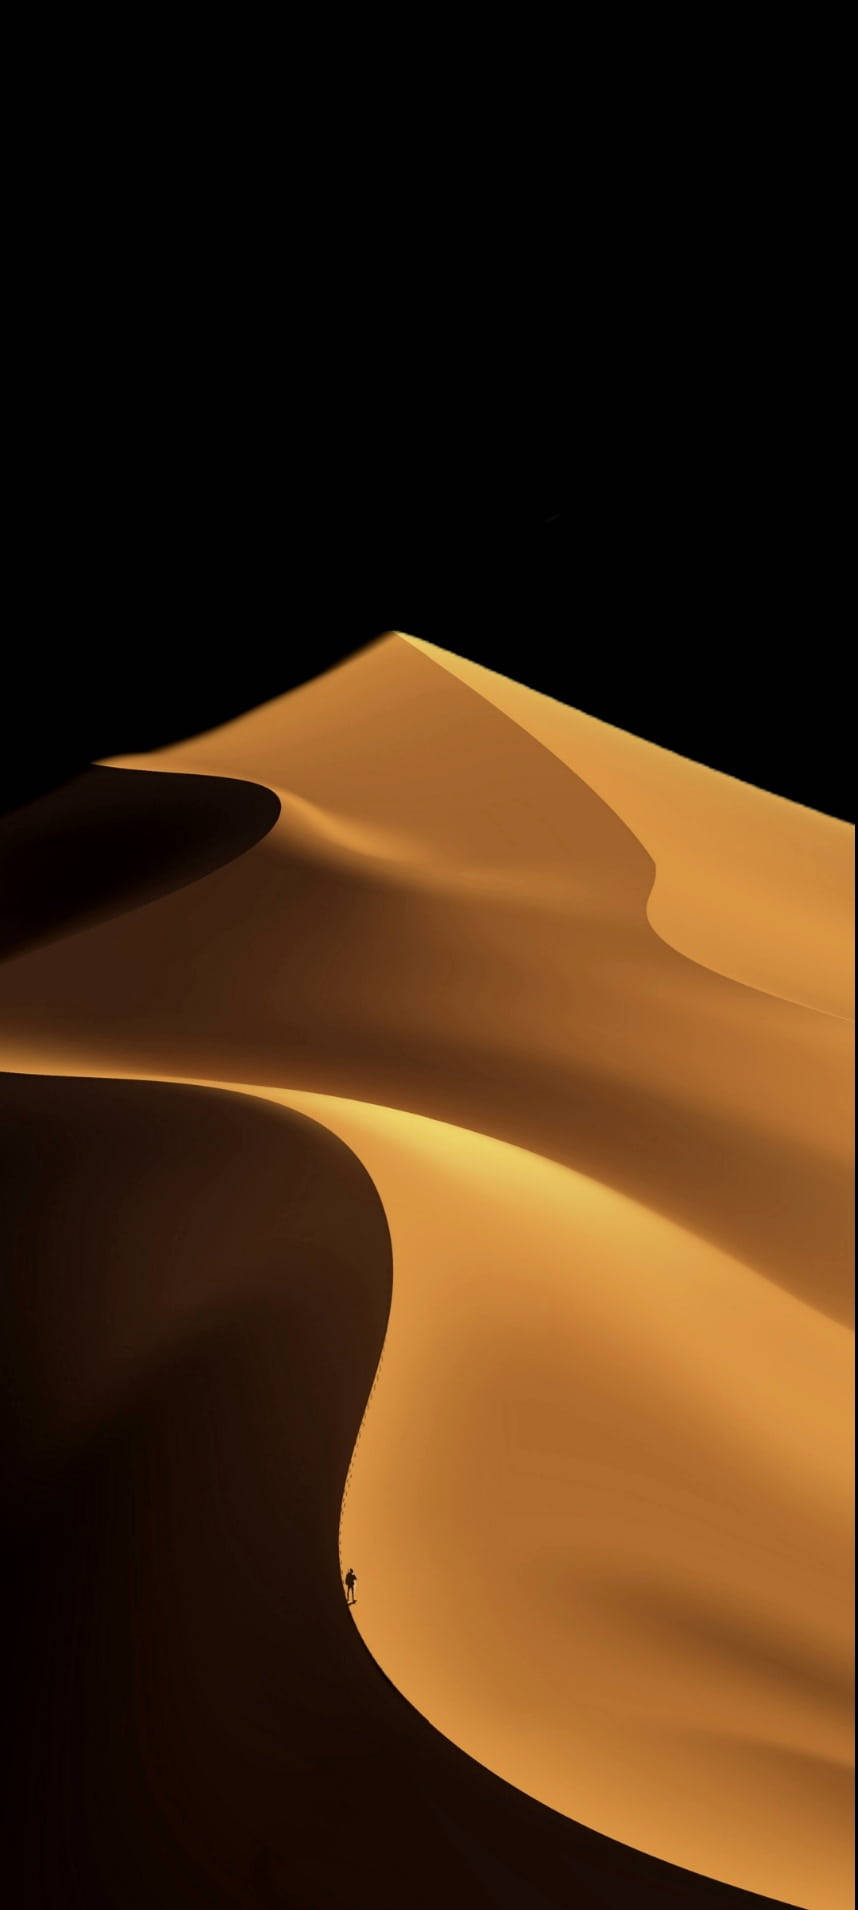 Dunes Black And Gold Iphone Background